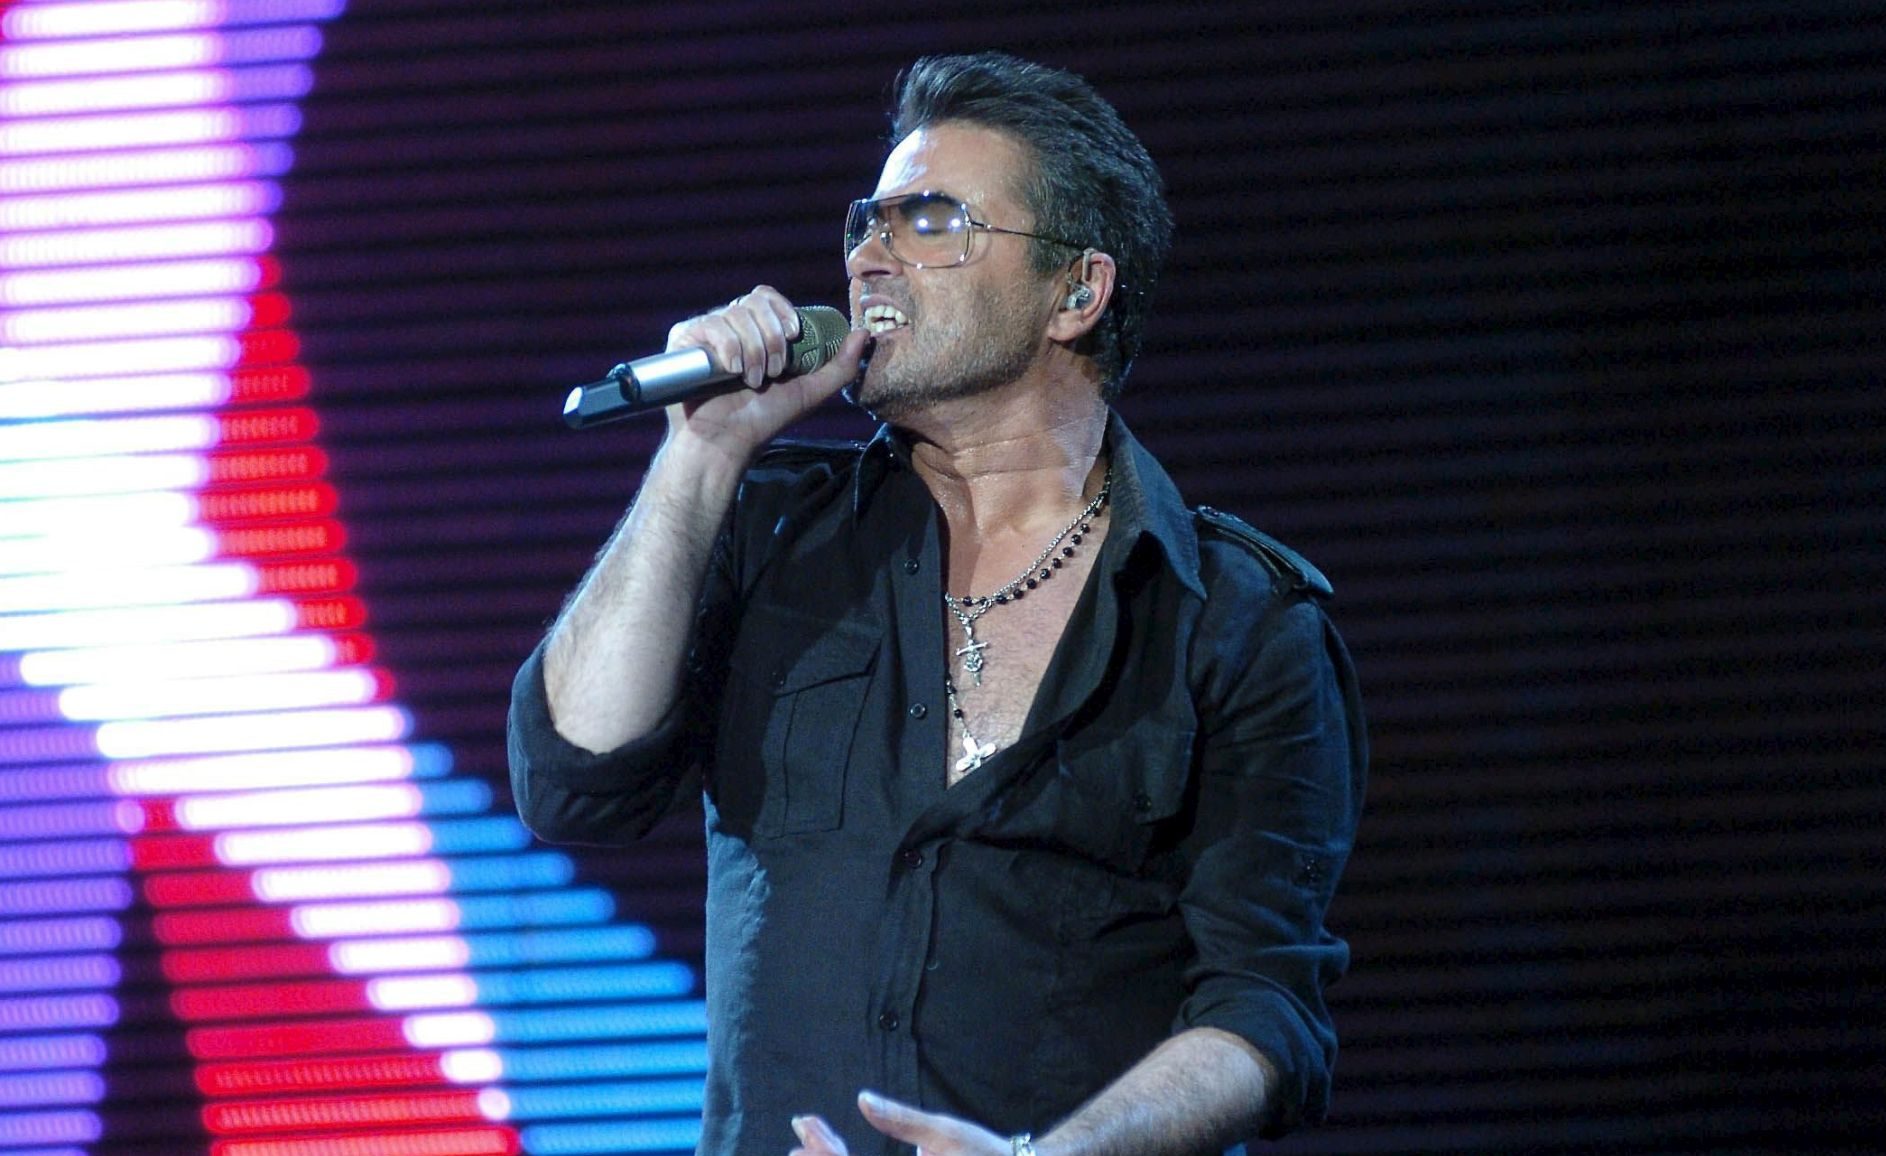 epa05688376 (FILE) - A file picture dated 23 May 2007 shows British singer George Michael performing during his concert in Puskas Ferenc Stadium in Budapest, Hungary. According to reports on late 25 December 2016, British popstar George Michael has died peacefully at home at the age of 53, his publicist has announced.  EPA/PETER KOLLANYI HUNGARY OUT